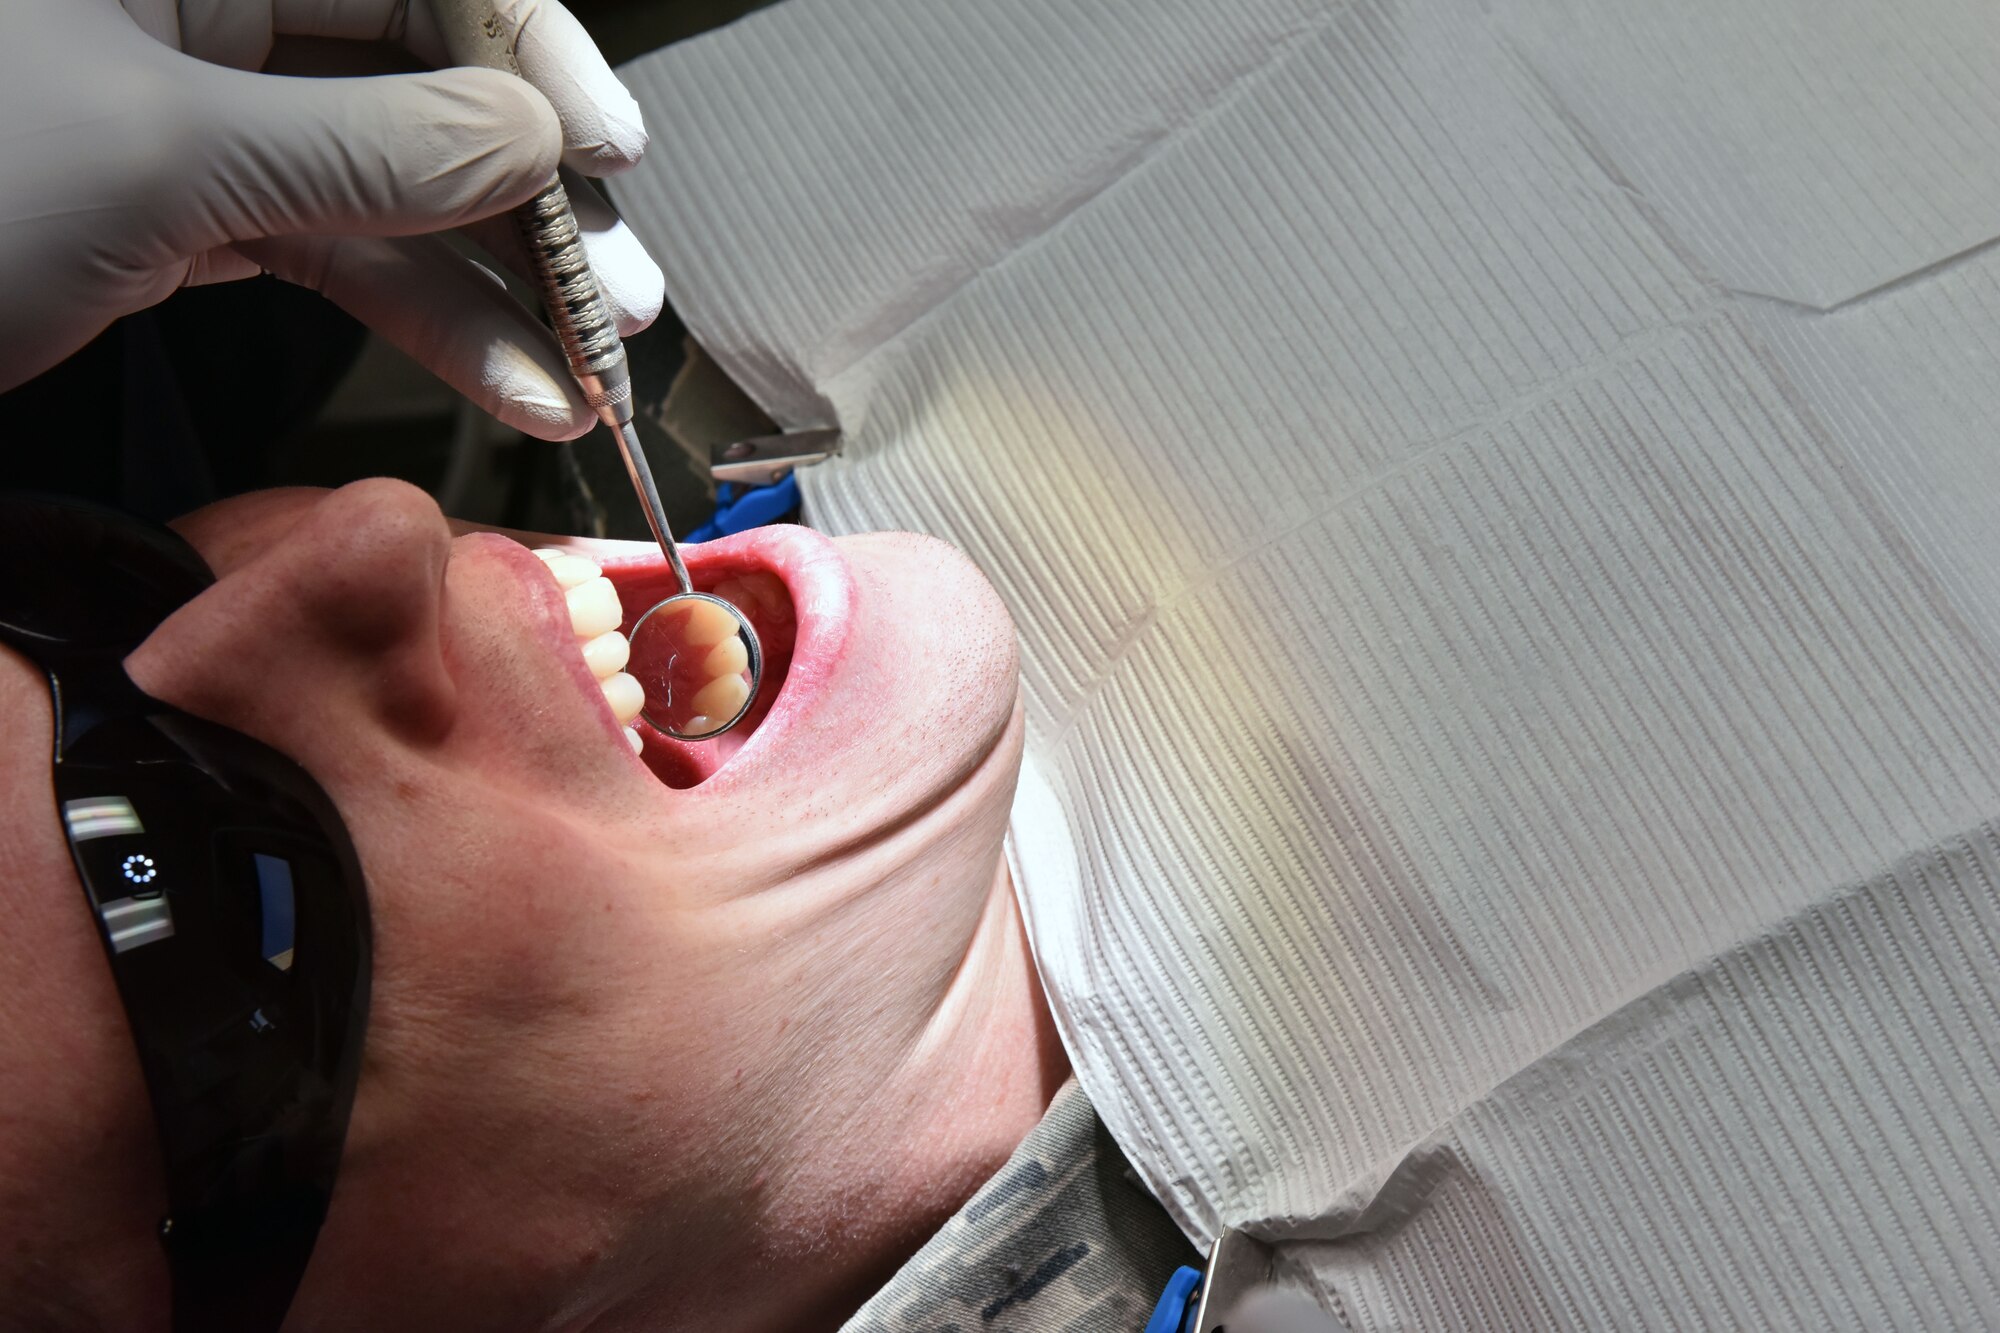 U.S. Air Force Capt. Robert Walter, a 354th Dental Flight dentist, inspects a patient’s teeth at Eielson Air Force Base, Alaska, Jan. 16, 2019. Dentistry is a vital part of keeping Airmen fit to fight, as dental conditions likely to result in a dental emergency within a year can prevent Airmen from deploying. (U.S. Air Force photo by Airman 1st Class Eric M. Fisher)